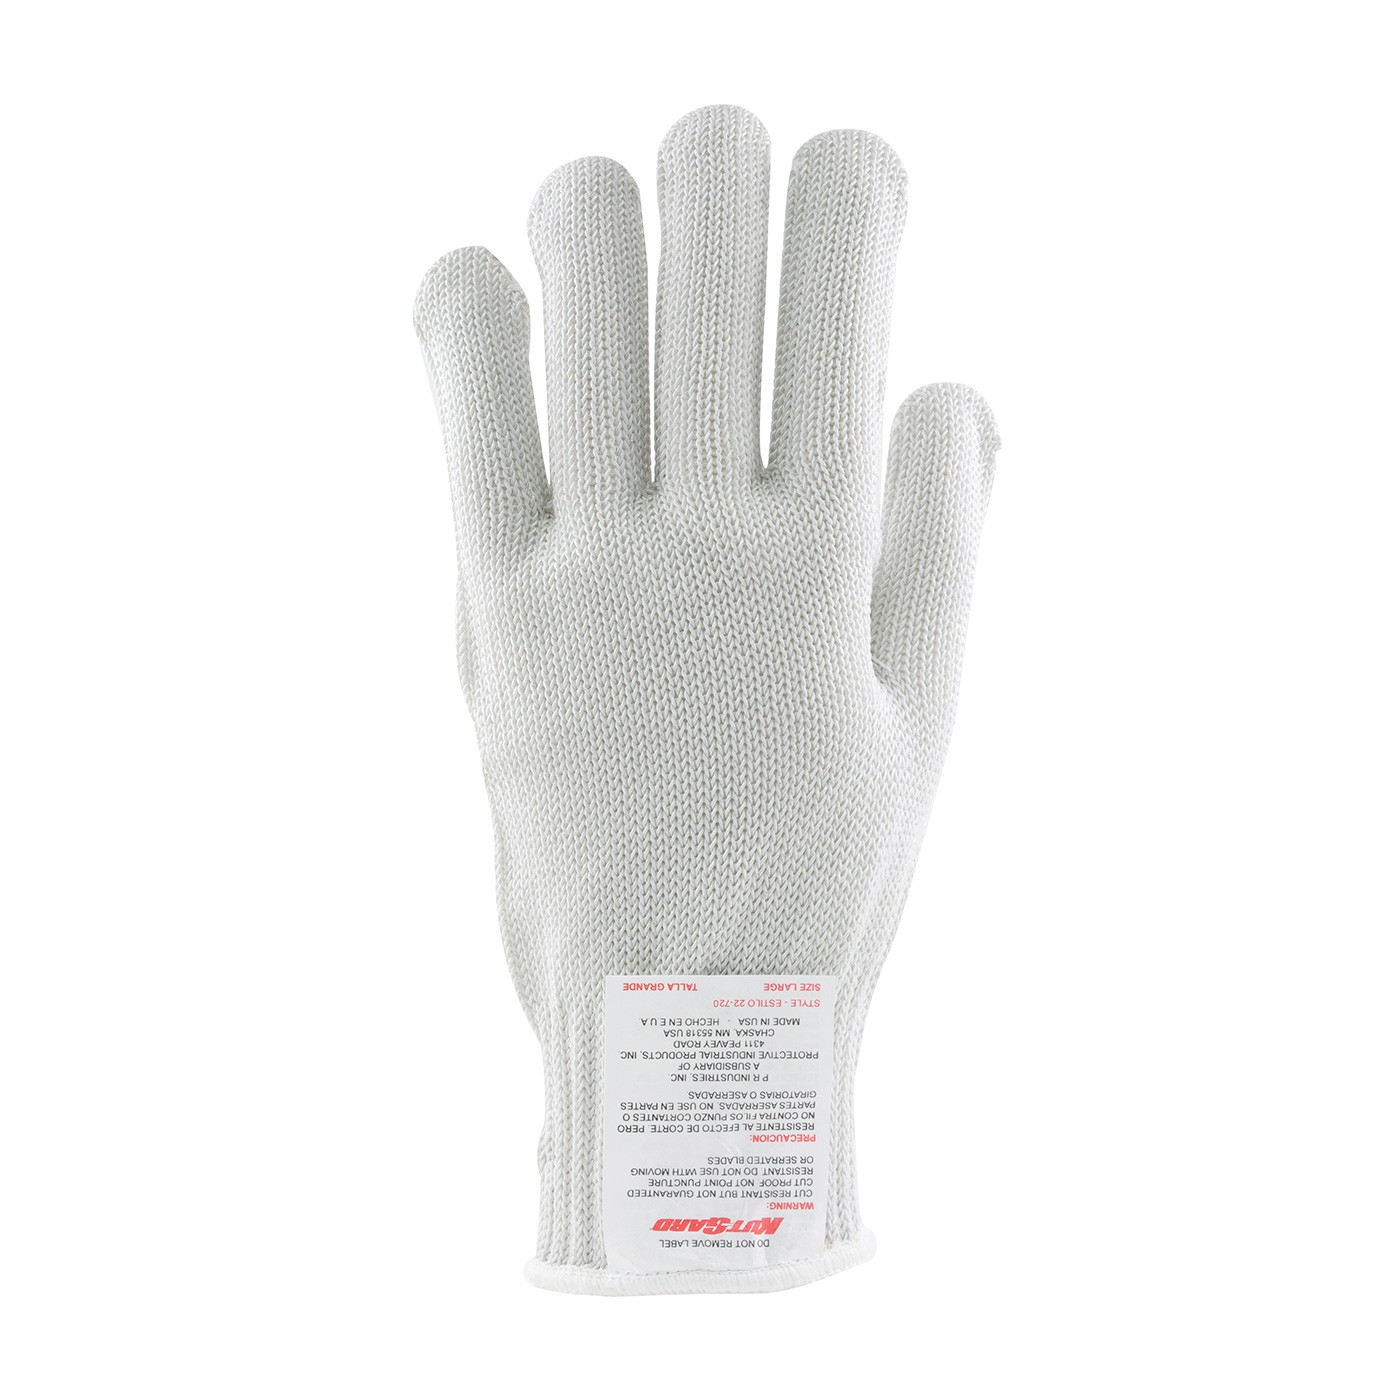 Kut Gard® Seamless Knit PolyKor® Blended Antimicrobial Glove - Medium Weight  (#22-720)